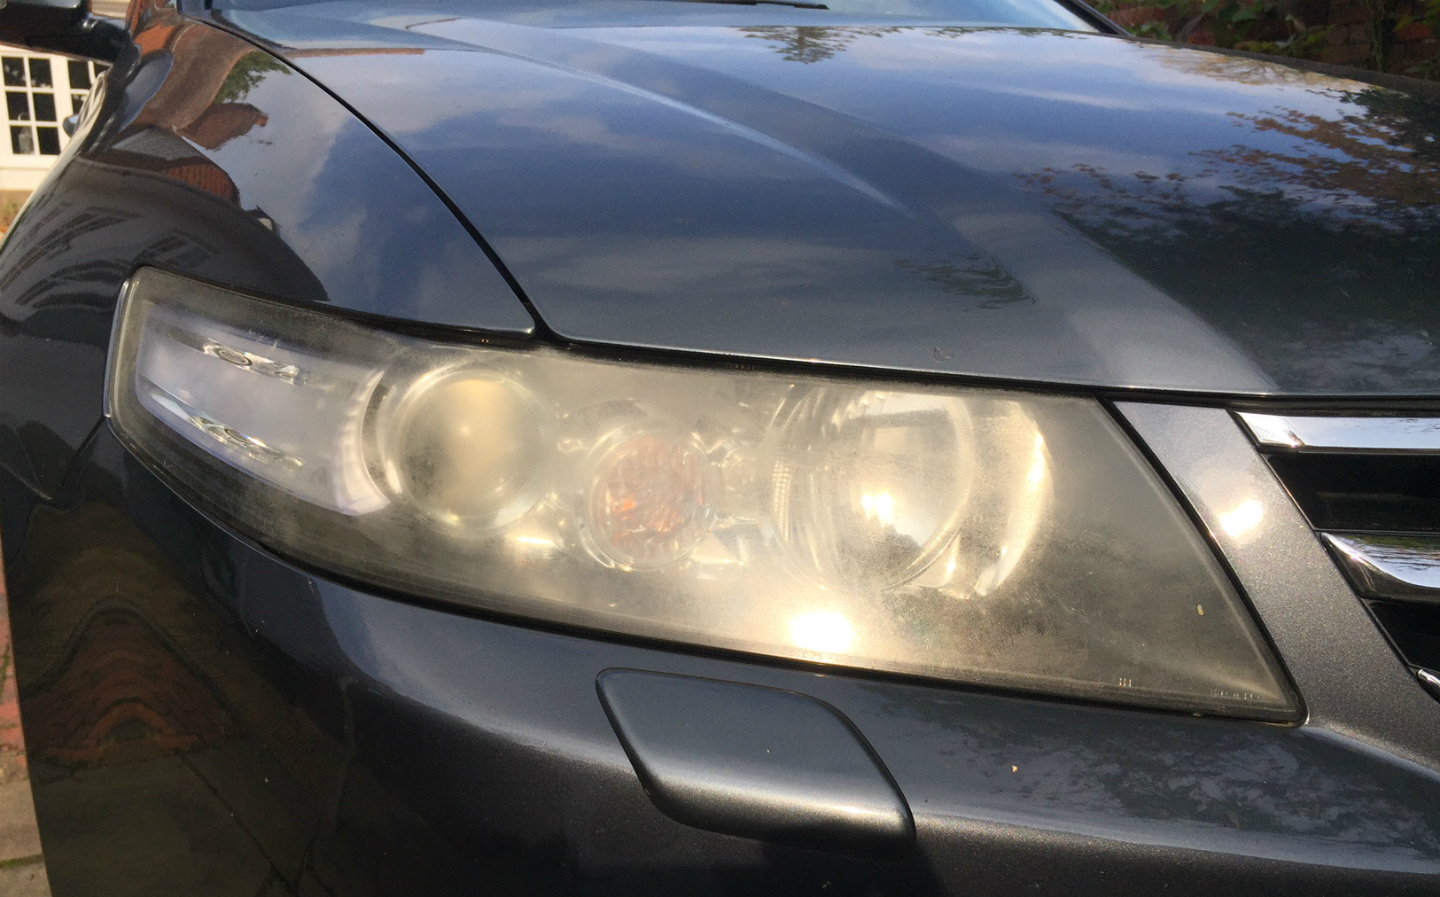 How to restore car headlight covers